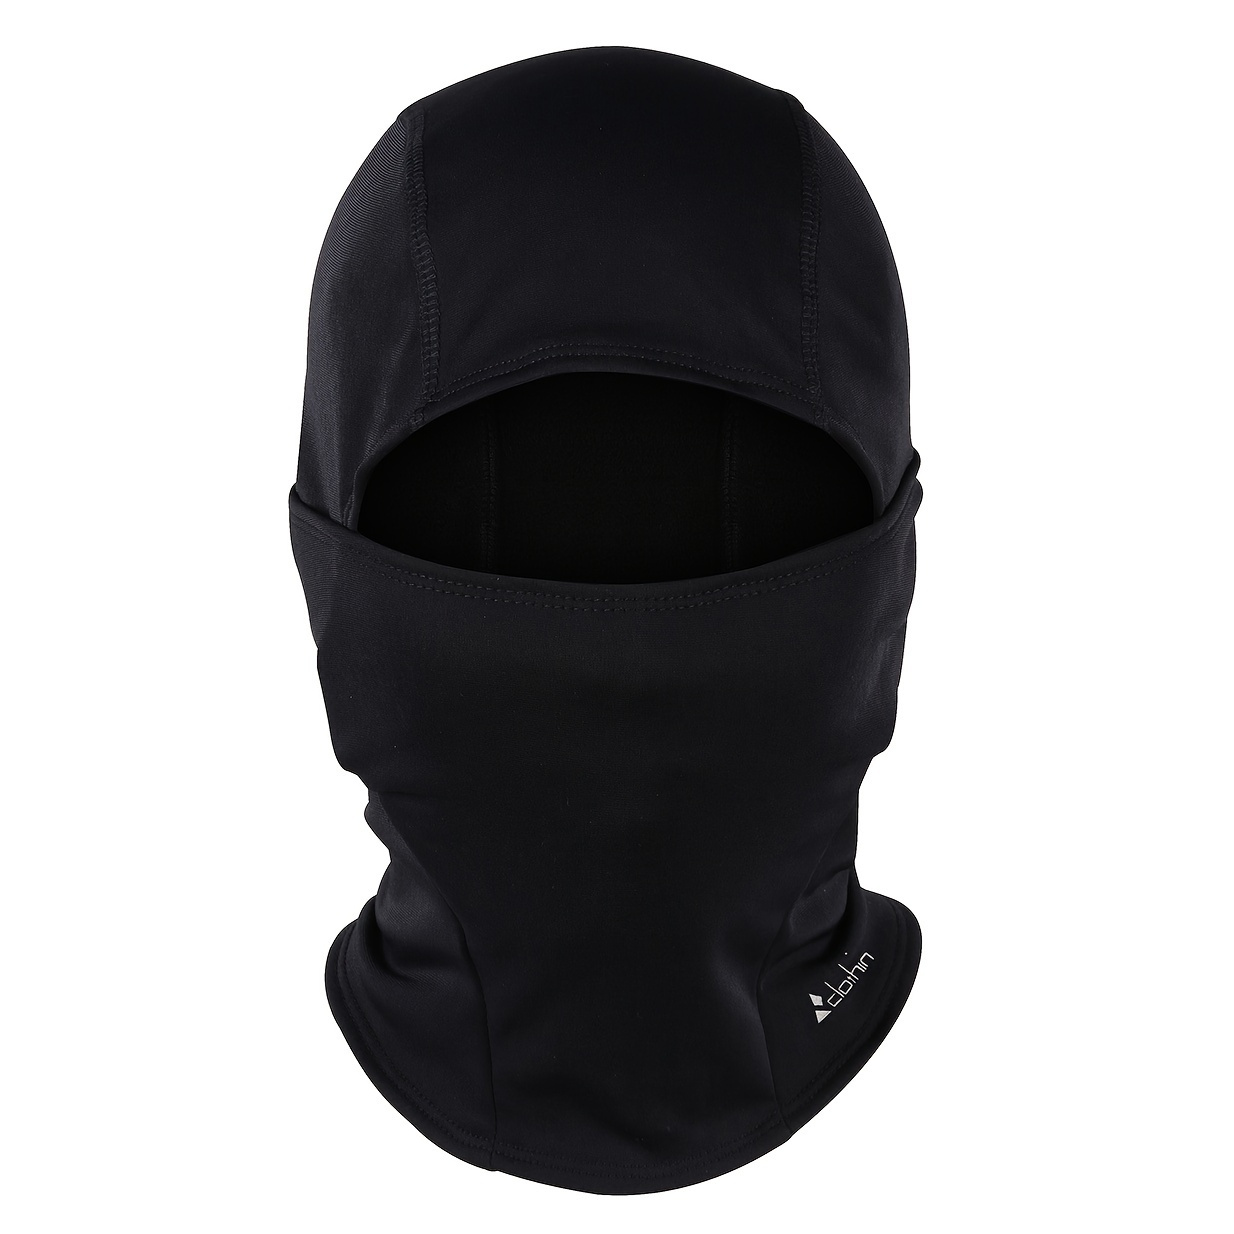 

Windproof Balaclava Mask For Men And Women - Uv Protection And Dustproof For Cycling, Hiking, And Fishing